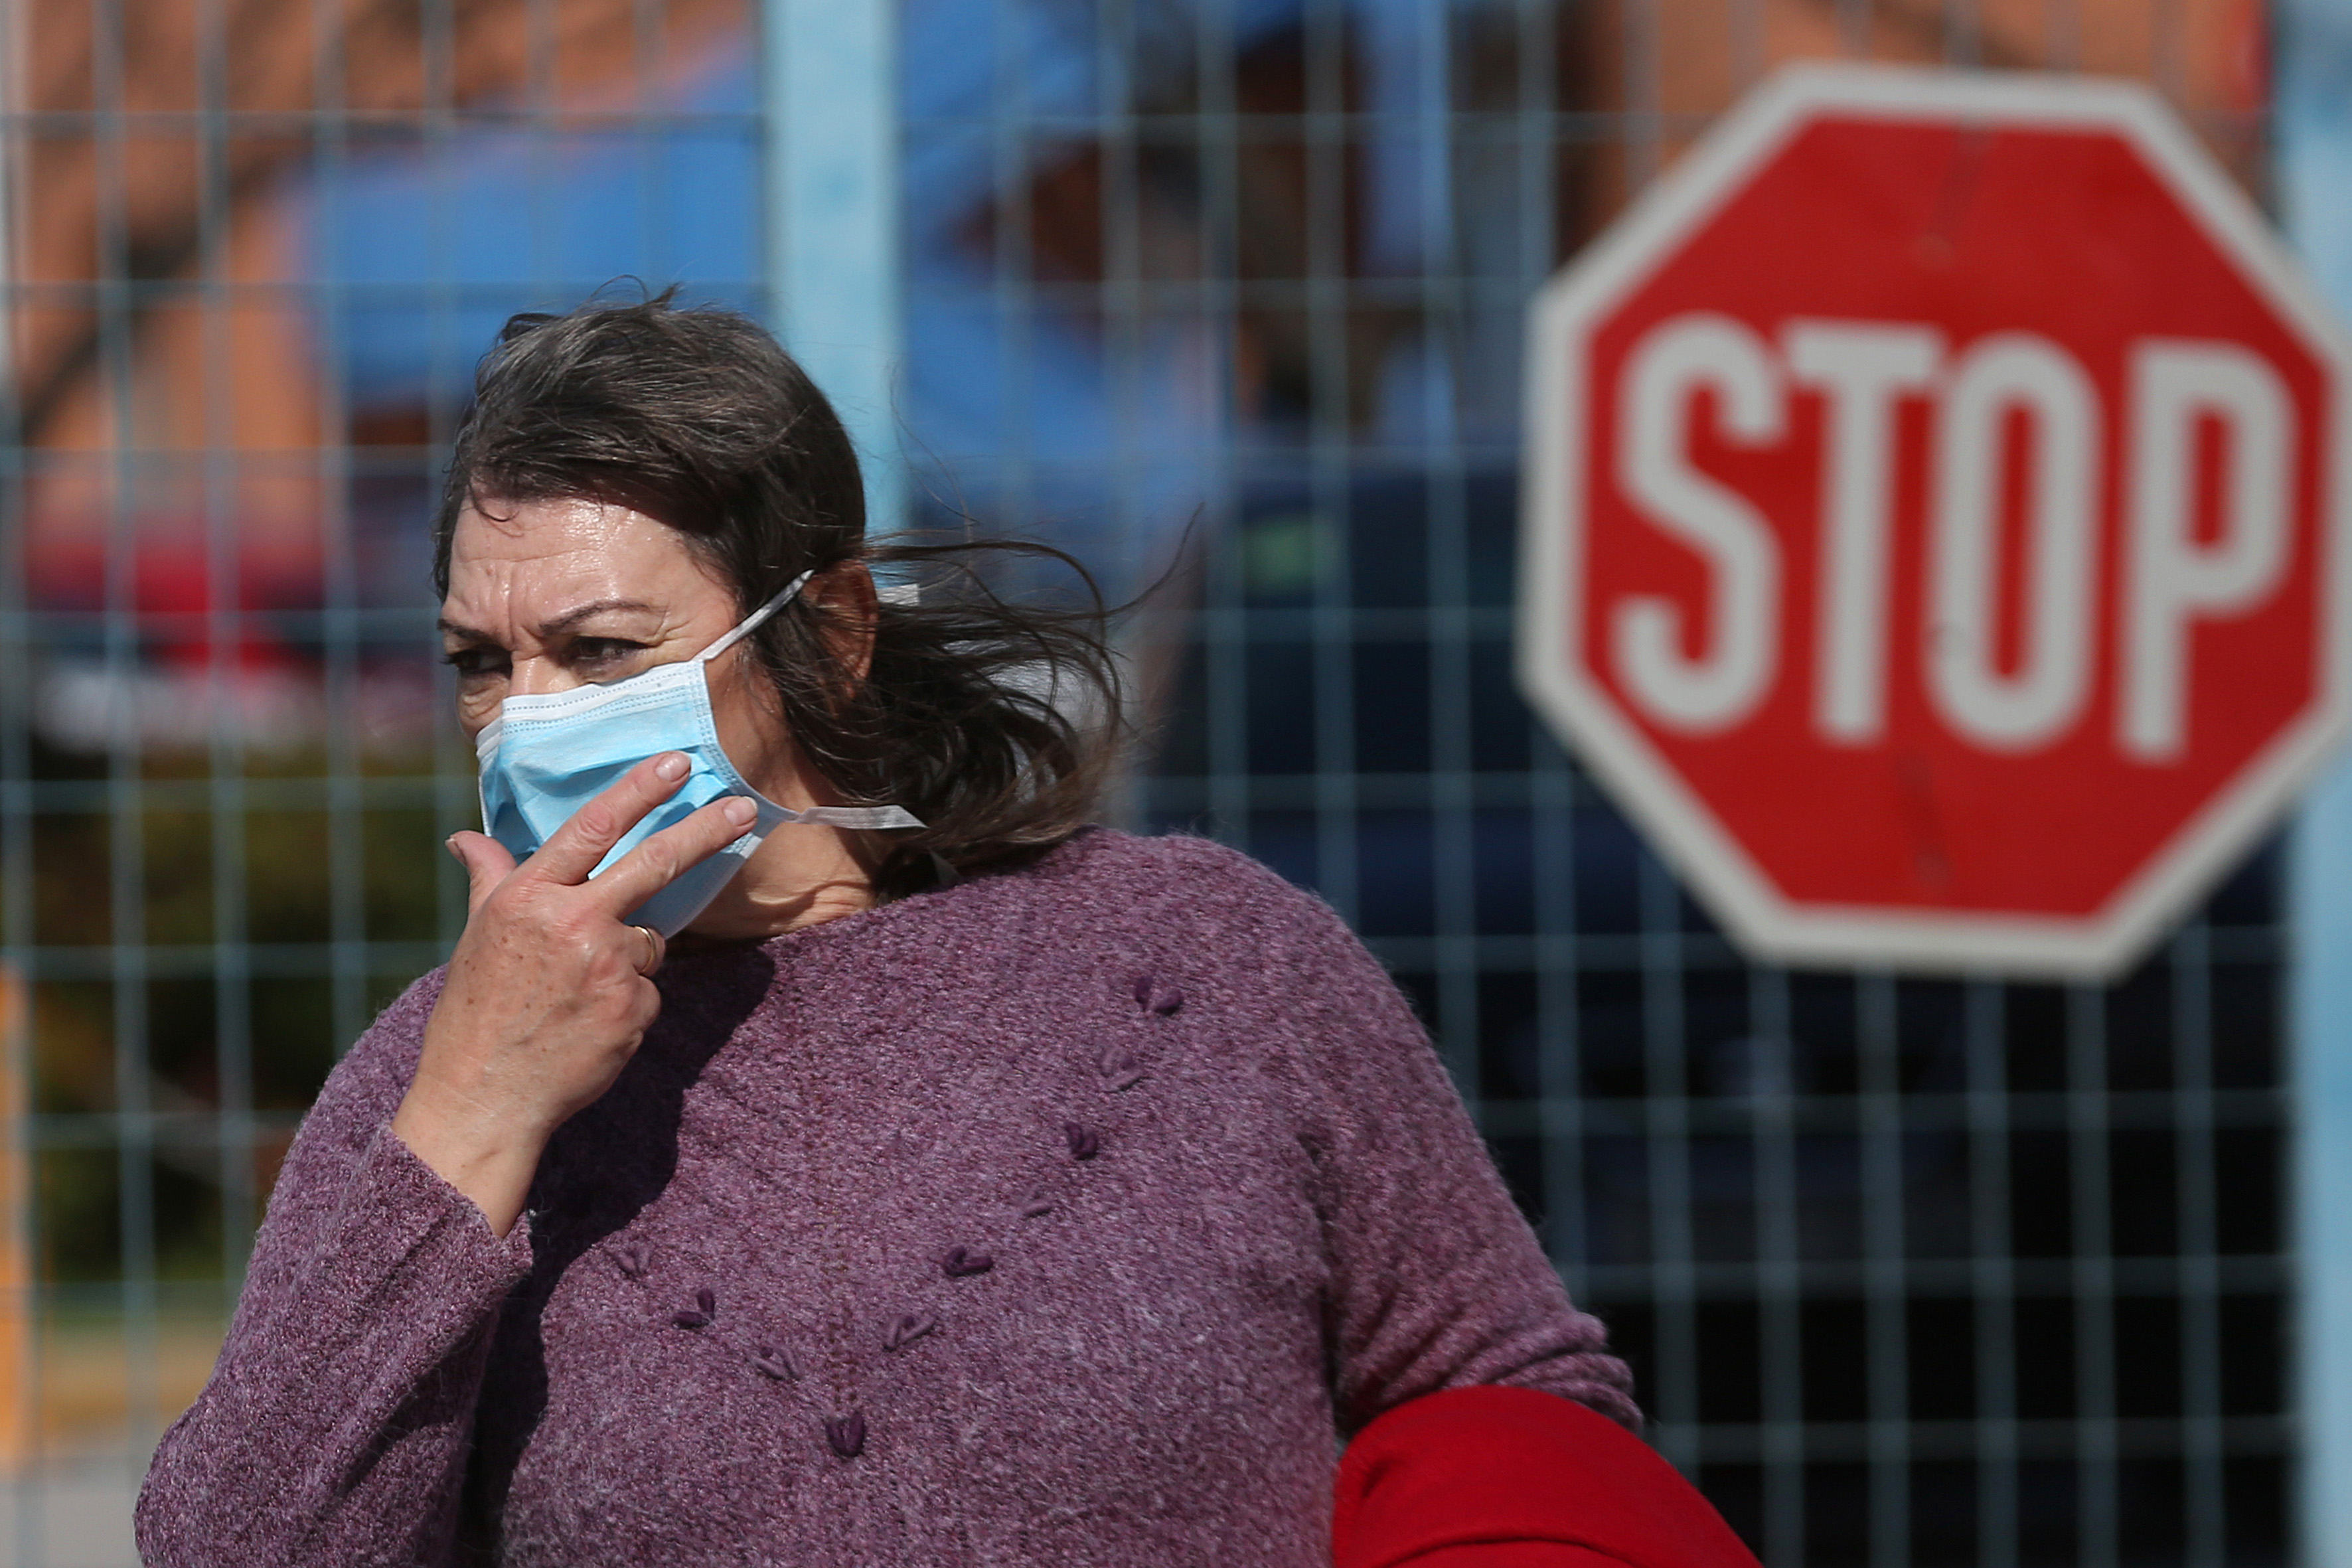 Mandatory Credit: Photo by ORESTIS PANAGIOTOU/EPA-EFE/Shutterstock (10568781d) A woman wears a protective face mask as she exits Attiko hospital, where the first confirmed, in Athens and the third in Greece coronavirus COVID-19 case is being treated, in Athens, Greece, 27 February 2020. The first coronavirus case in Athens is confirmed, Greece - 27 Feb 2020